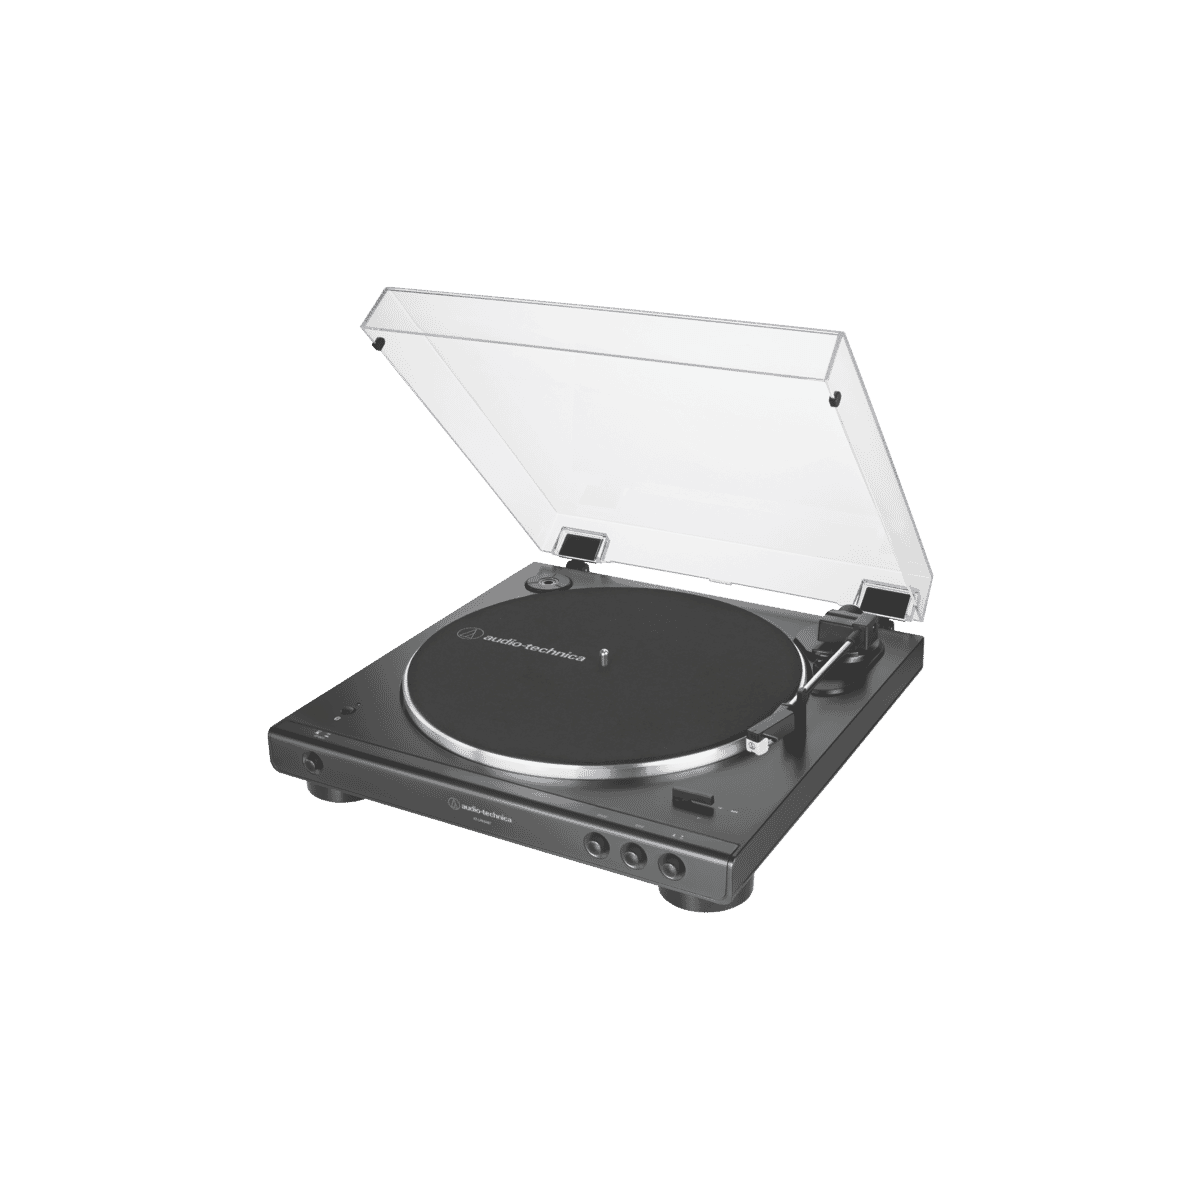 Audio Technica ATLP60XBTBK Bluetooth Connected Turntable at The Good Guys